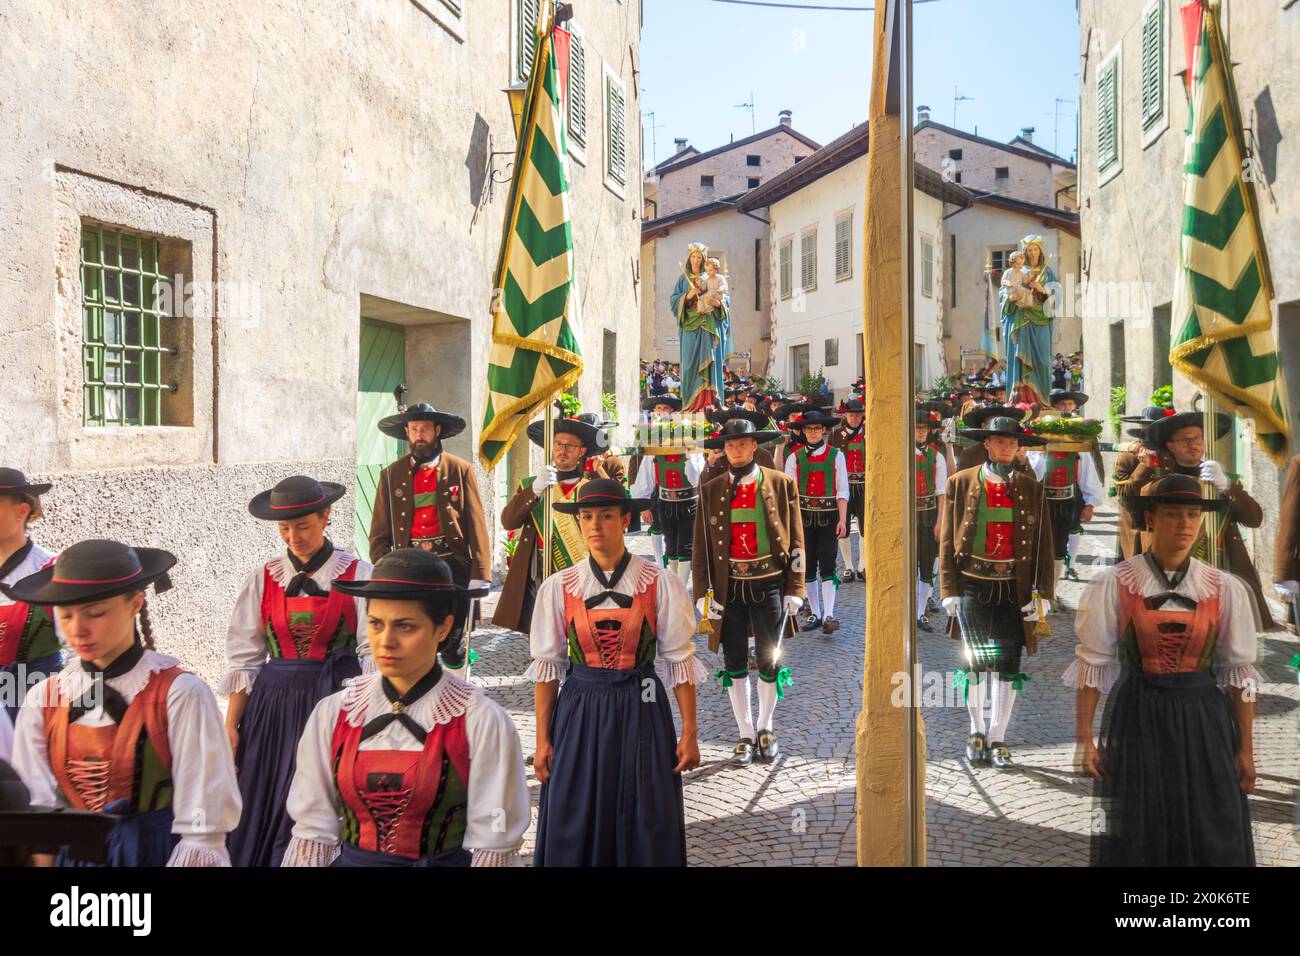 Tramin an der Weinstraße (Termeno sulla Strada del Vino), Corpus Christi procession, people in traditional clothes, church flags, reflection in window in South Tyrol, Trentino-South Tyrol, Italy Stock Photo